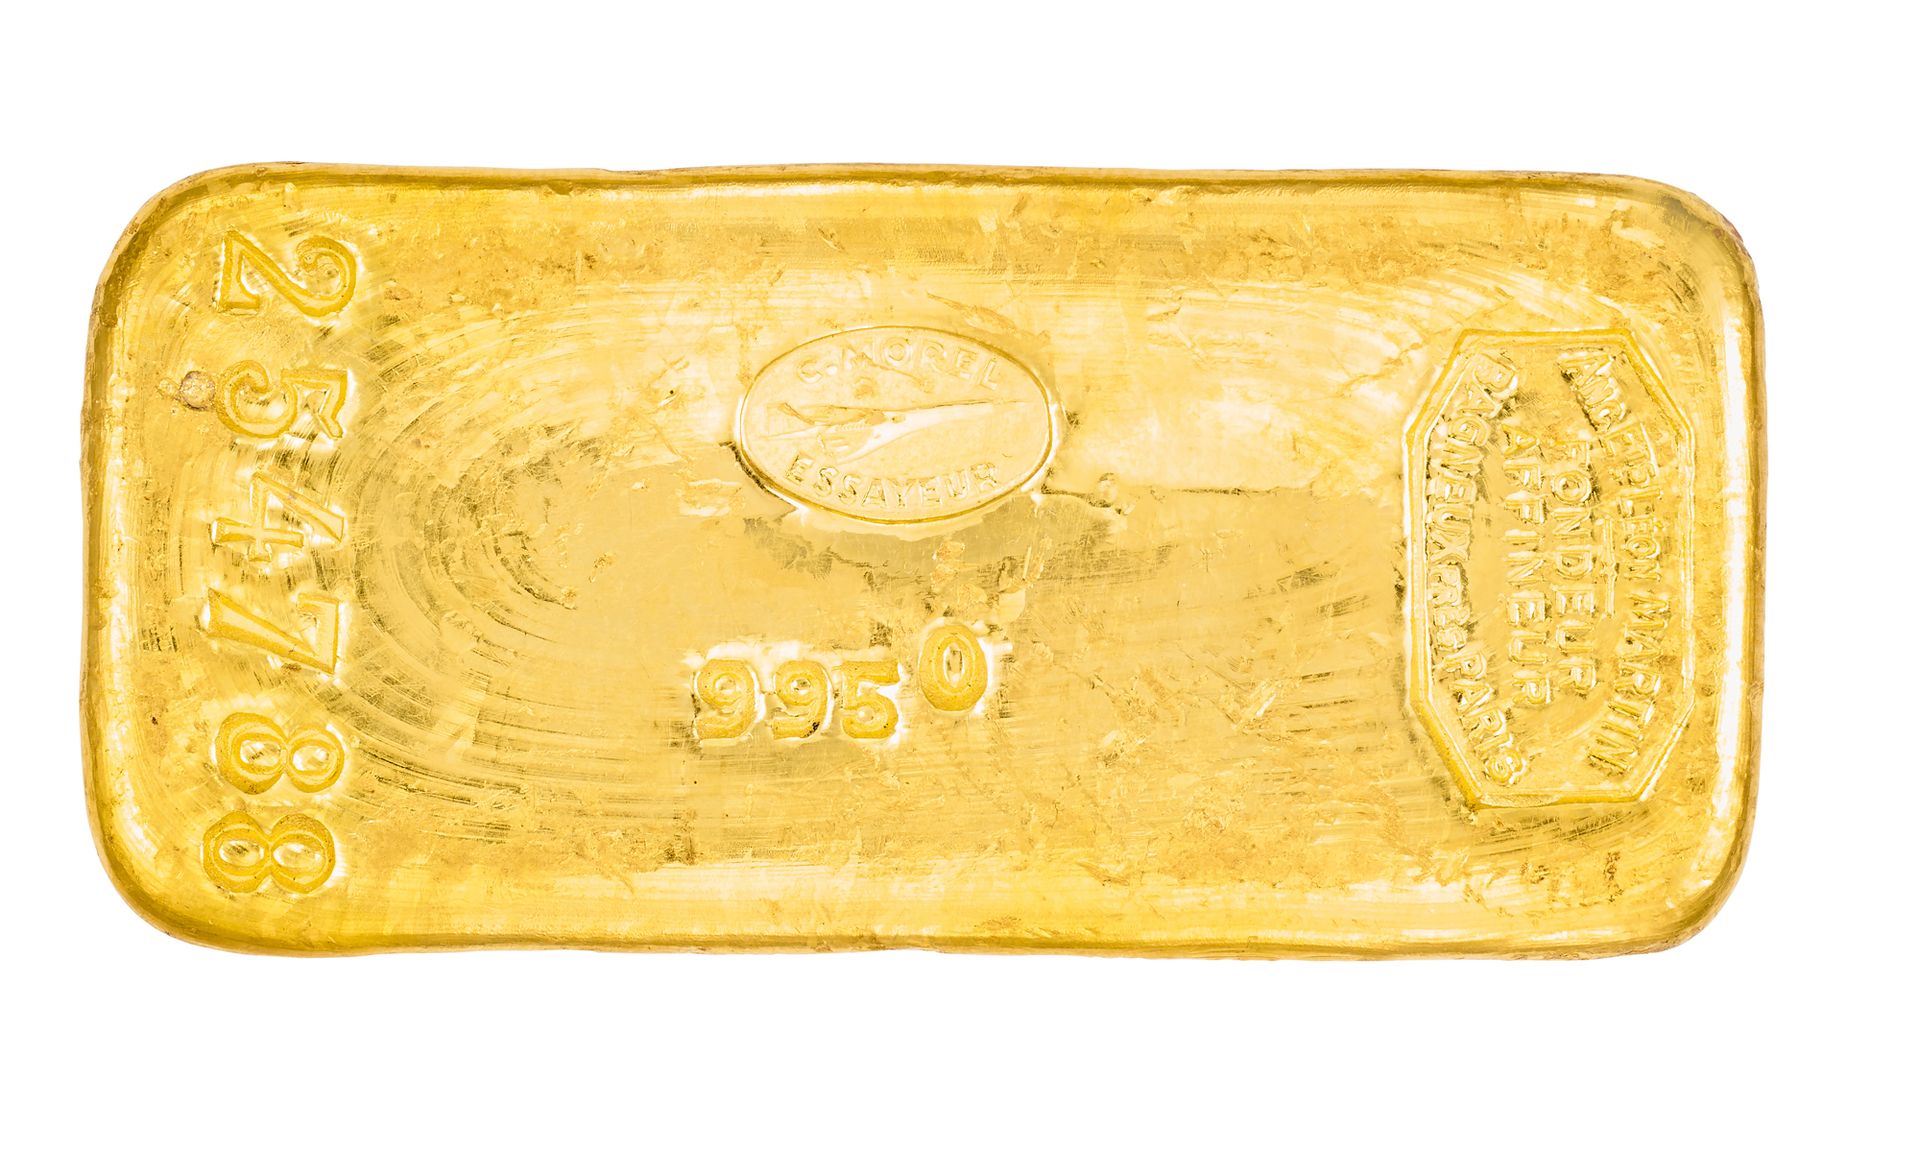 Lingot d'or Numbered
Weighing 998.40 g fine gold (24K- 995/1000)

Accompanied by&hellip;